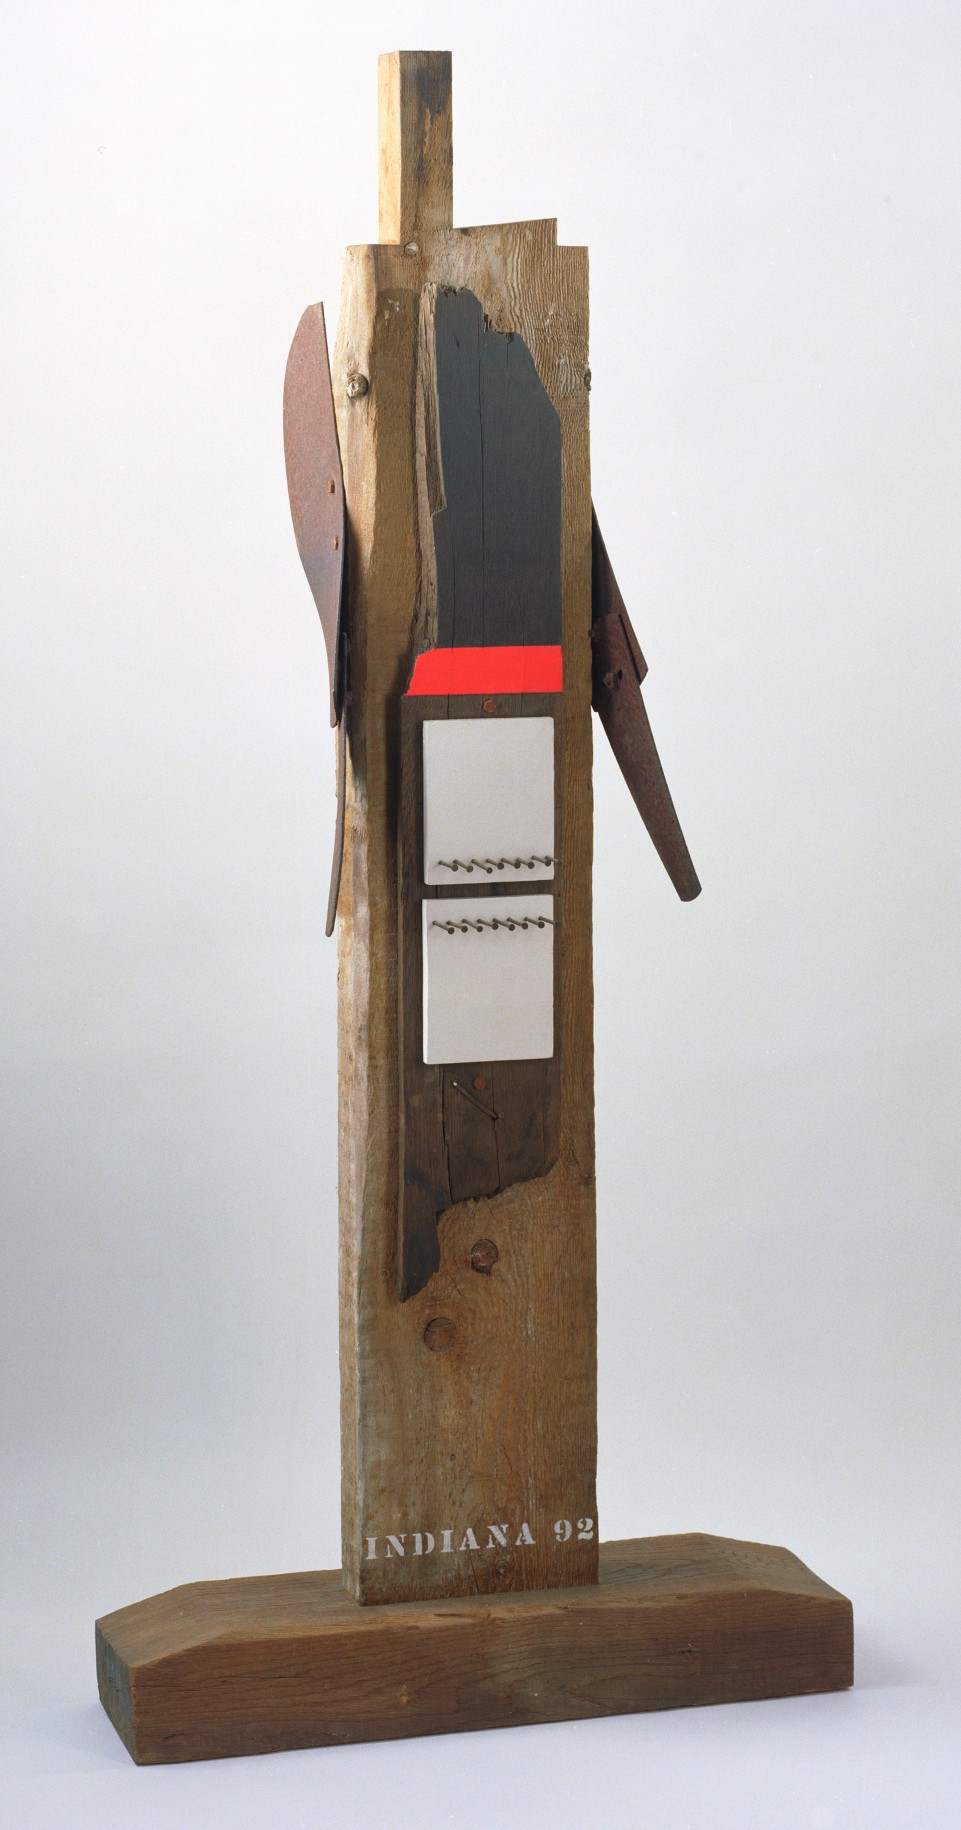 The verso of the sculpture Hero. It is signed and dated &quot;Indiana 92&quot; in white stenciled letters across the bottom of the beam. A long, thin piece of wood has been affixed to the center. It is been painted with a red band and two white rectangular pieces of wood, each with a row of nails, have been affixed to it.